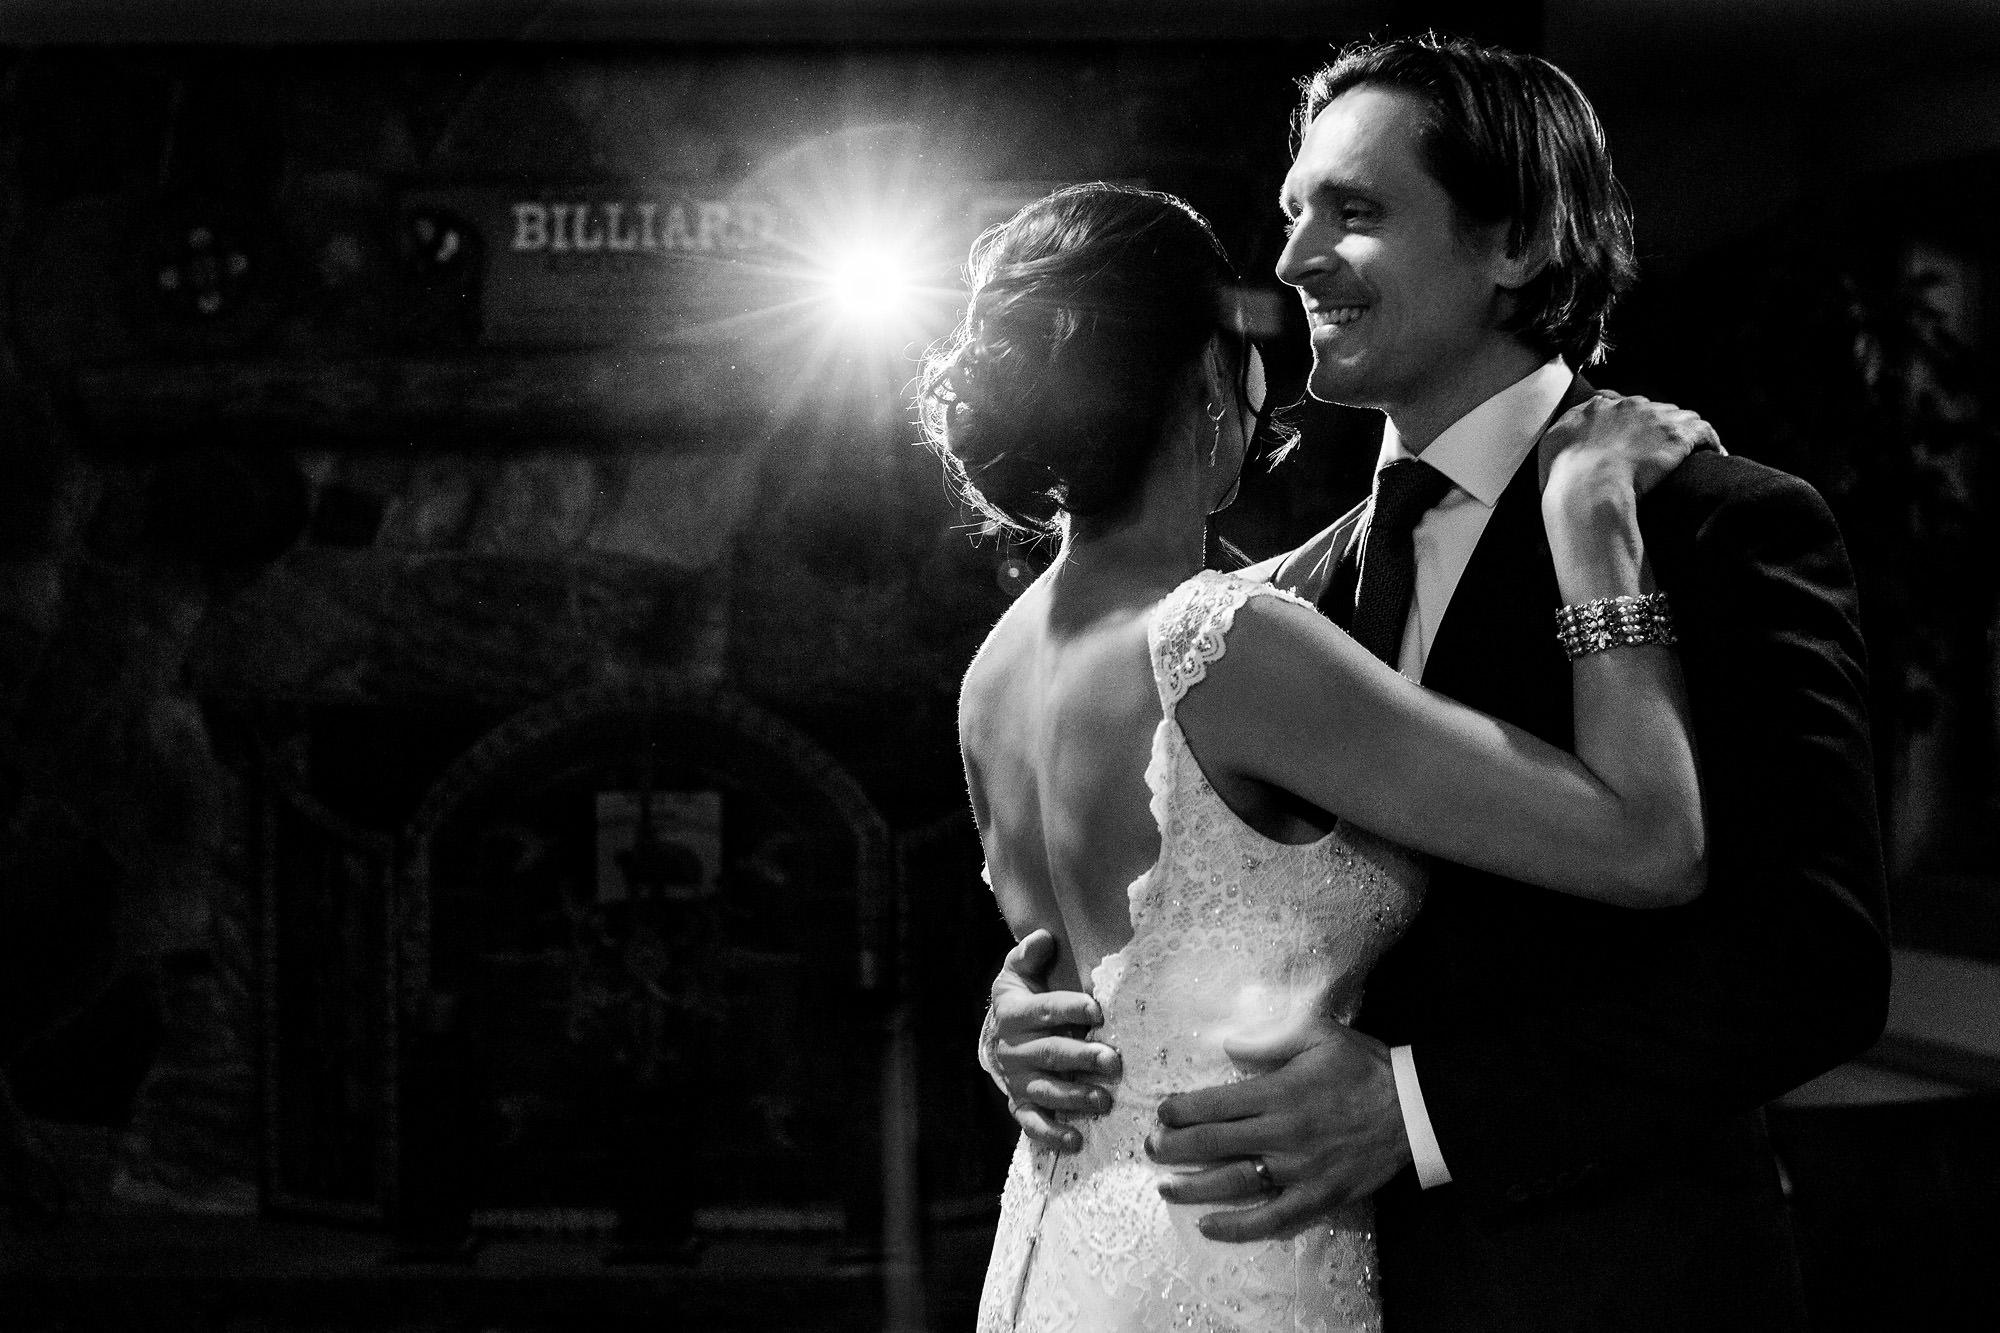 A bride and groom dance at their small winter wedding reception in Maine